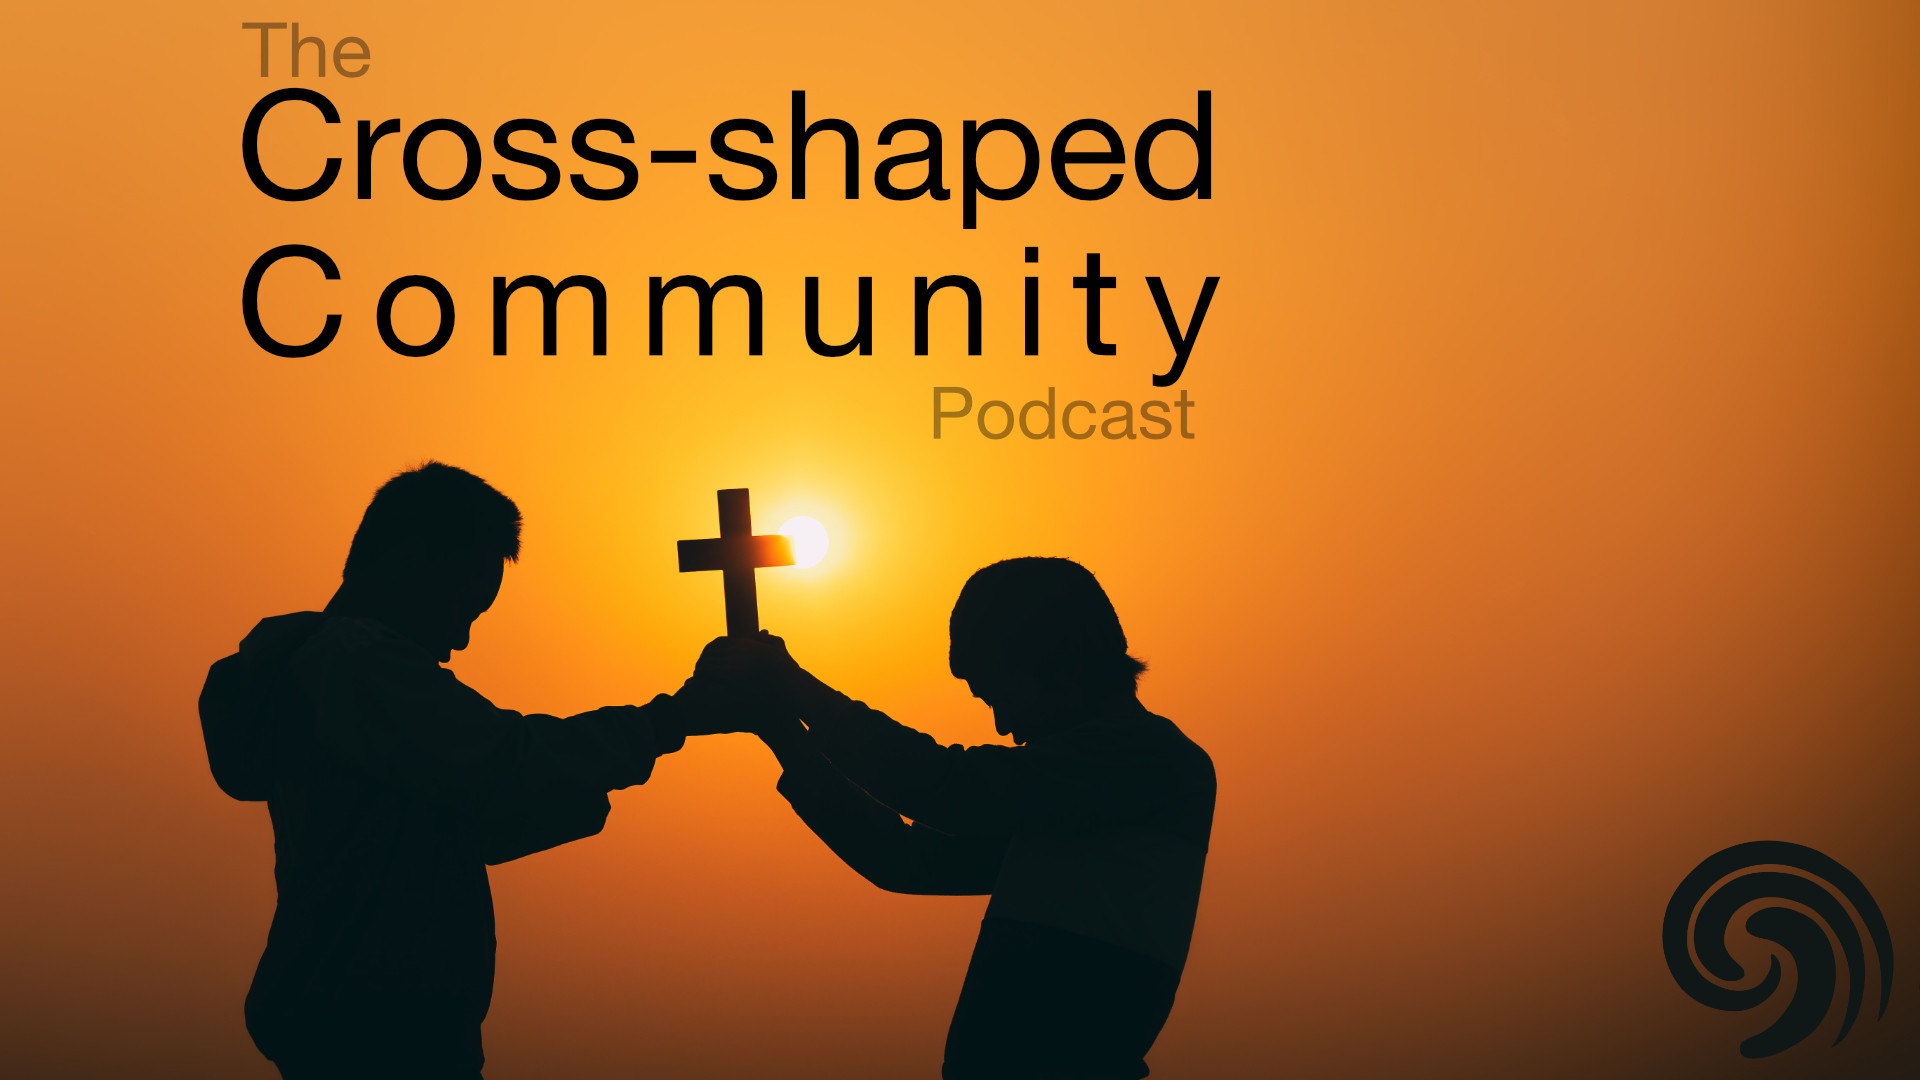 Cross-shaped community reframes the issue Image